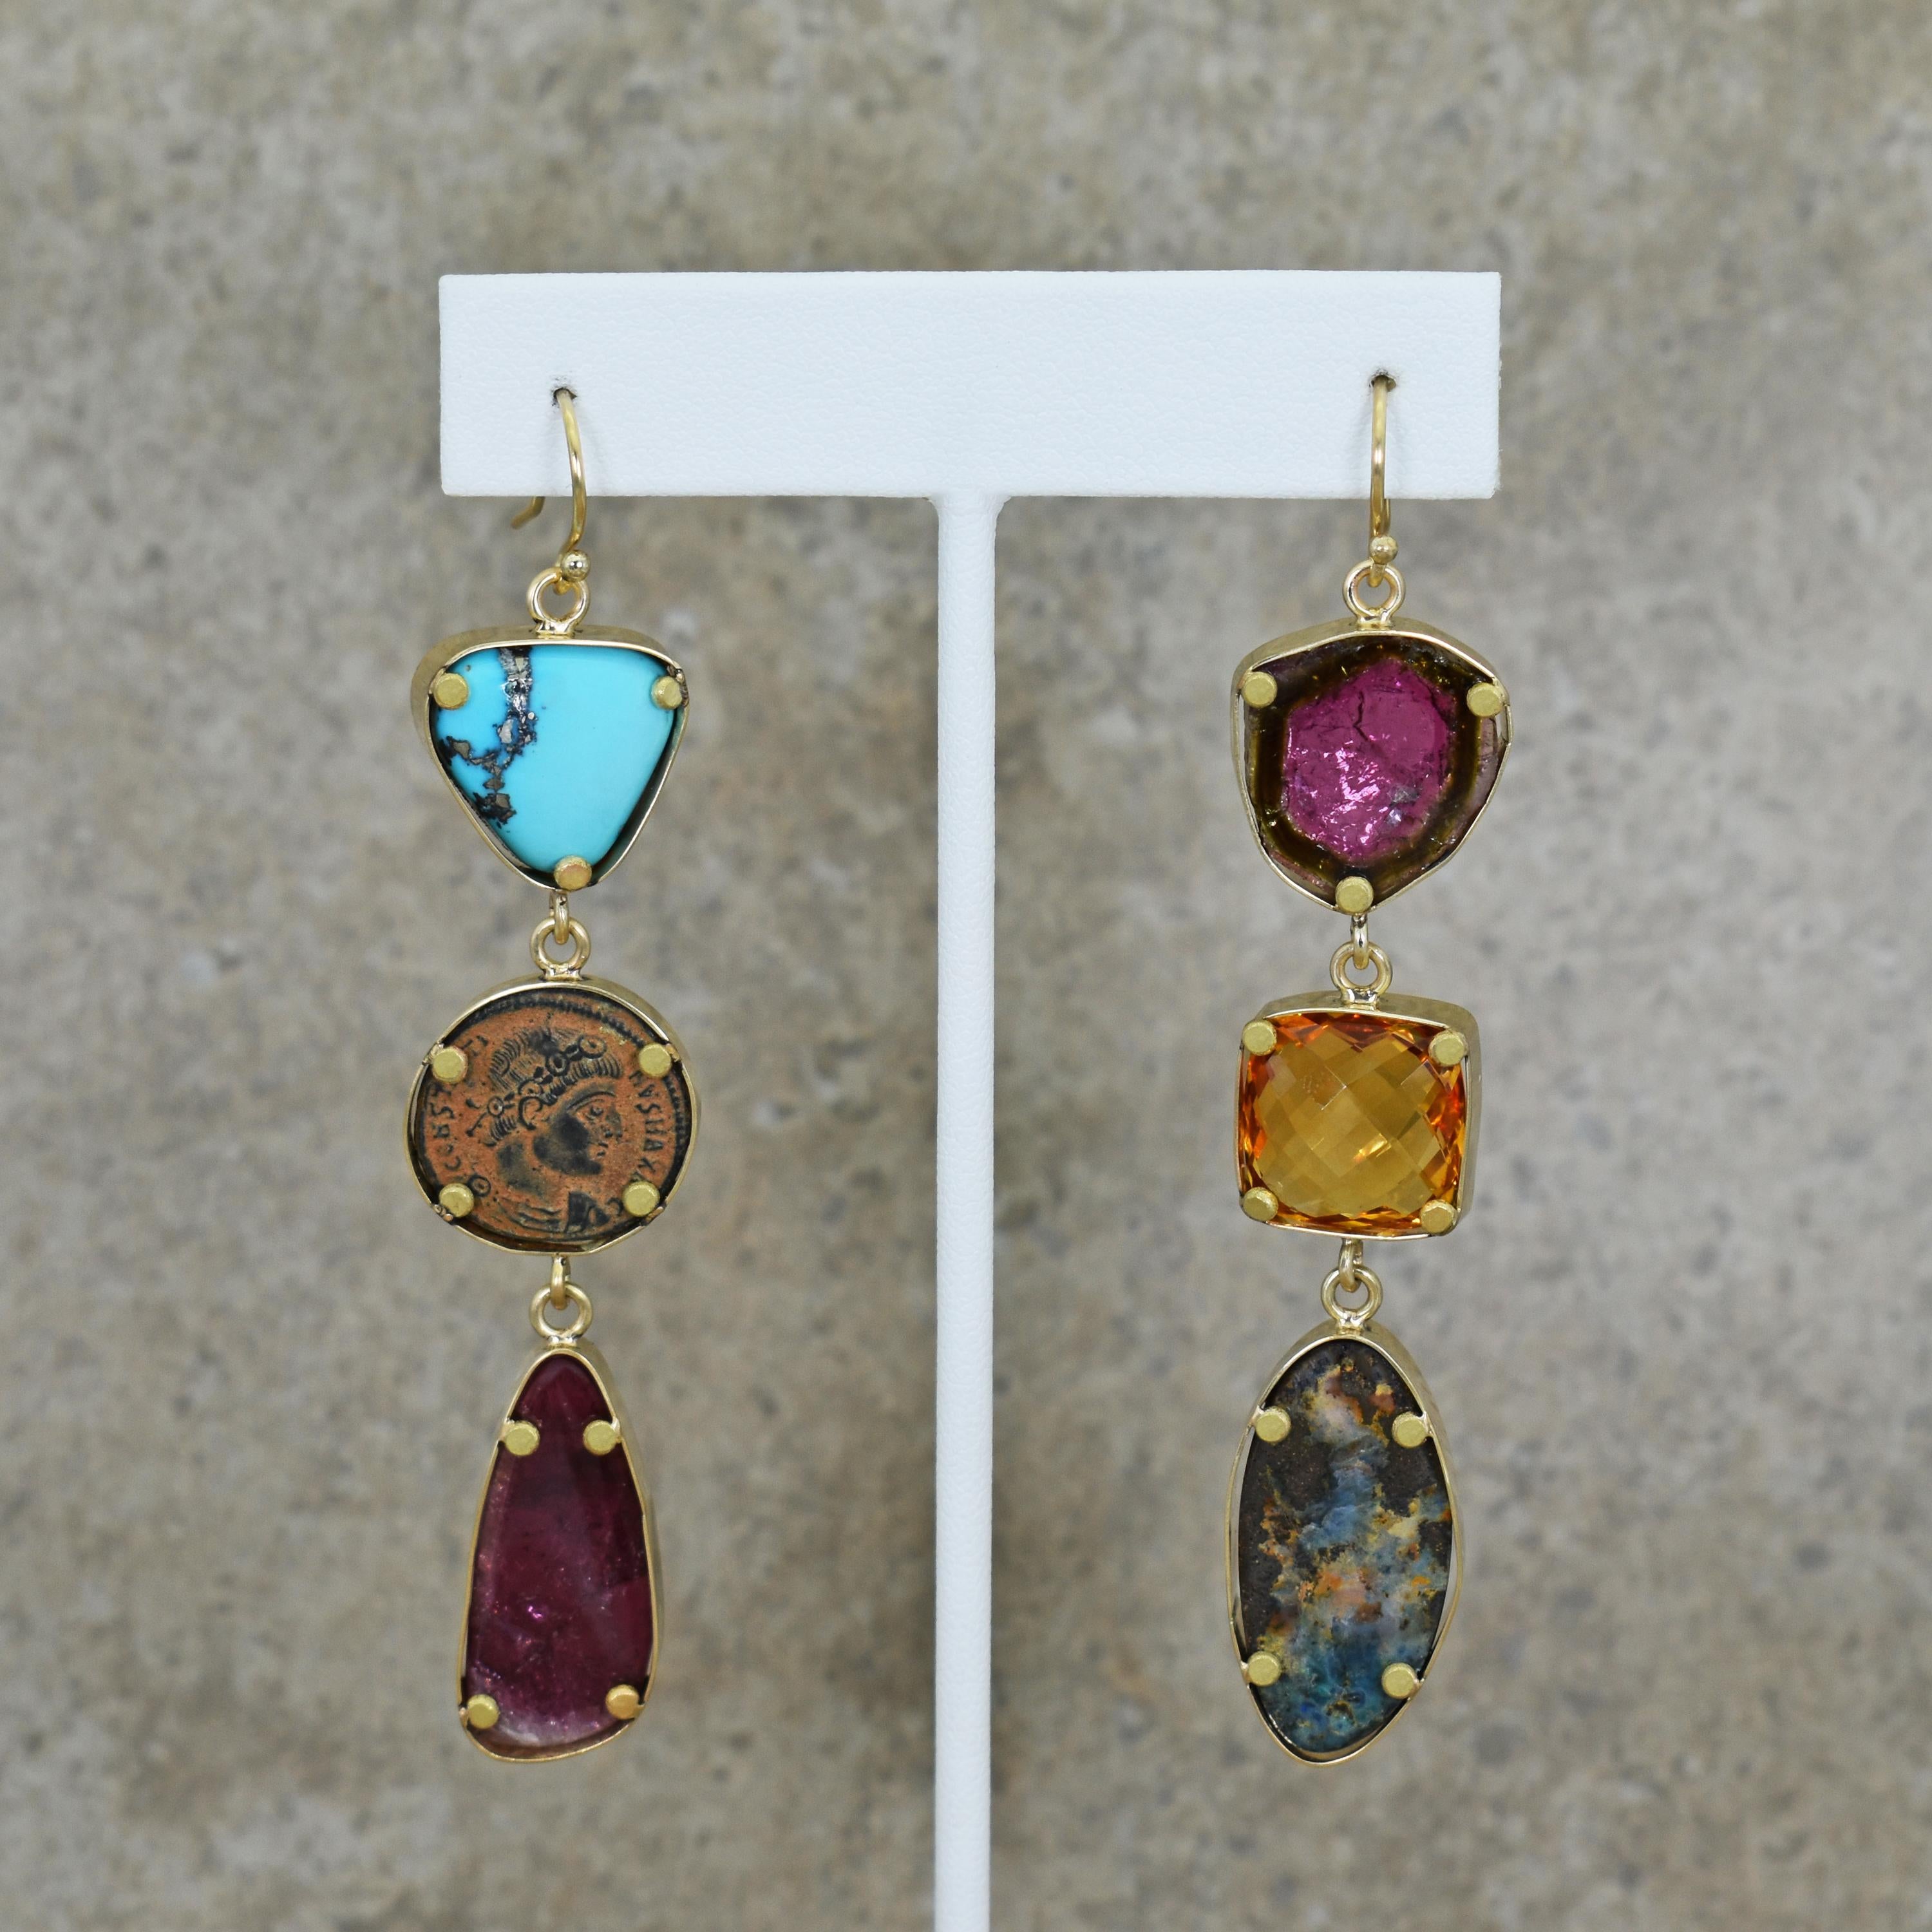 Sleeping Beauty Turquoise, Ancient Roman bronze coin, Russian Pink and Watermelon Tourmaline, Citrine, and Australian Boulder Opal 18k yellow gold asymmetrical dangle earrings. Ancient Roman coin is Constantine I the Great; Gloria Exercitvs (334-335